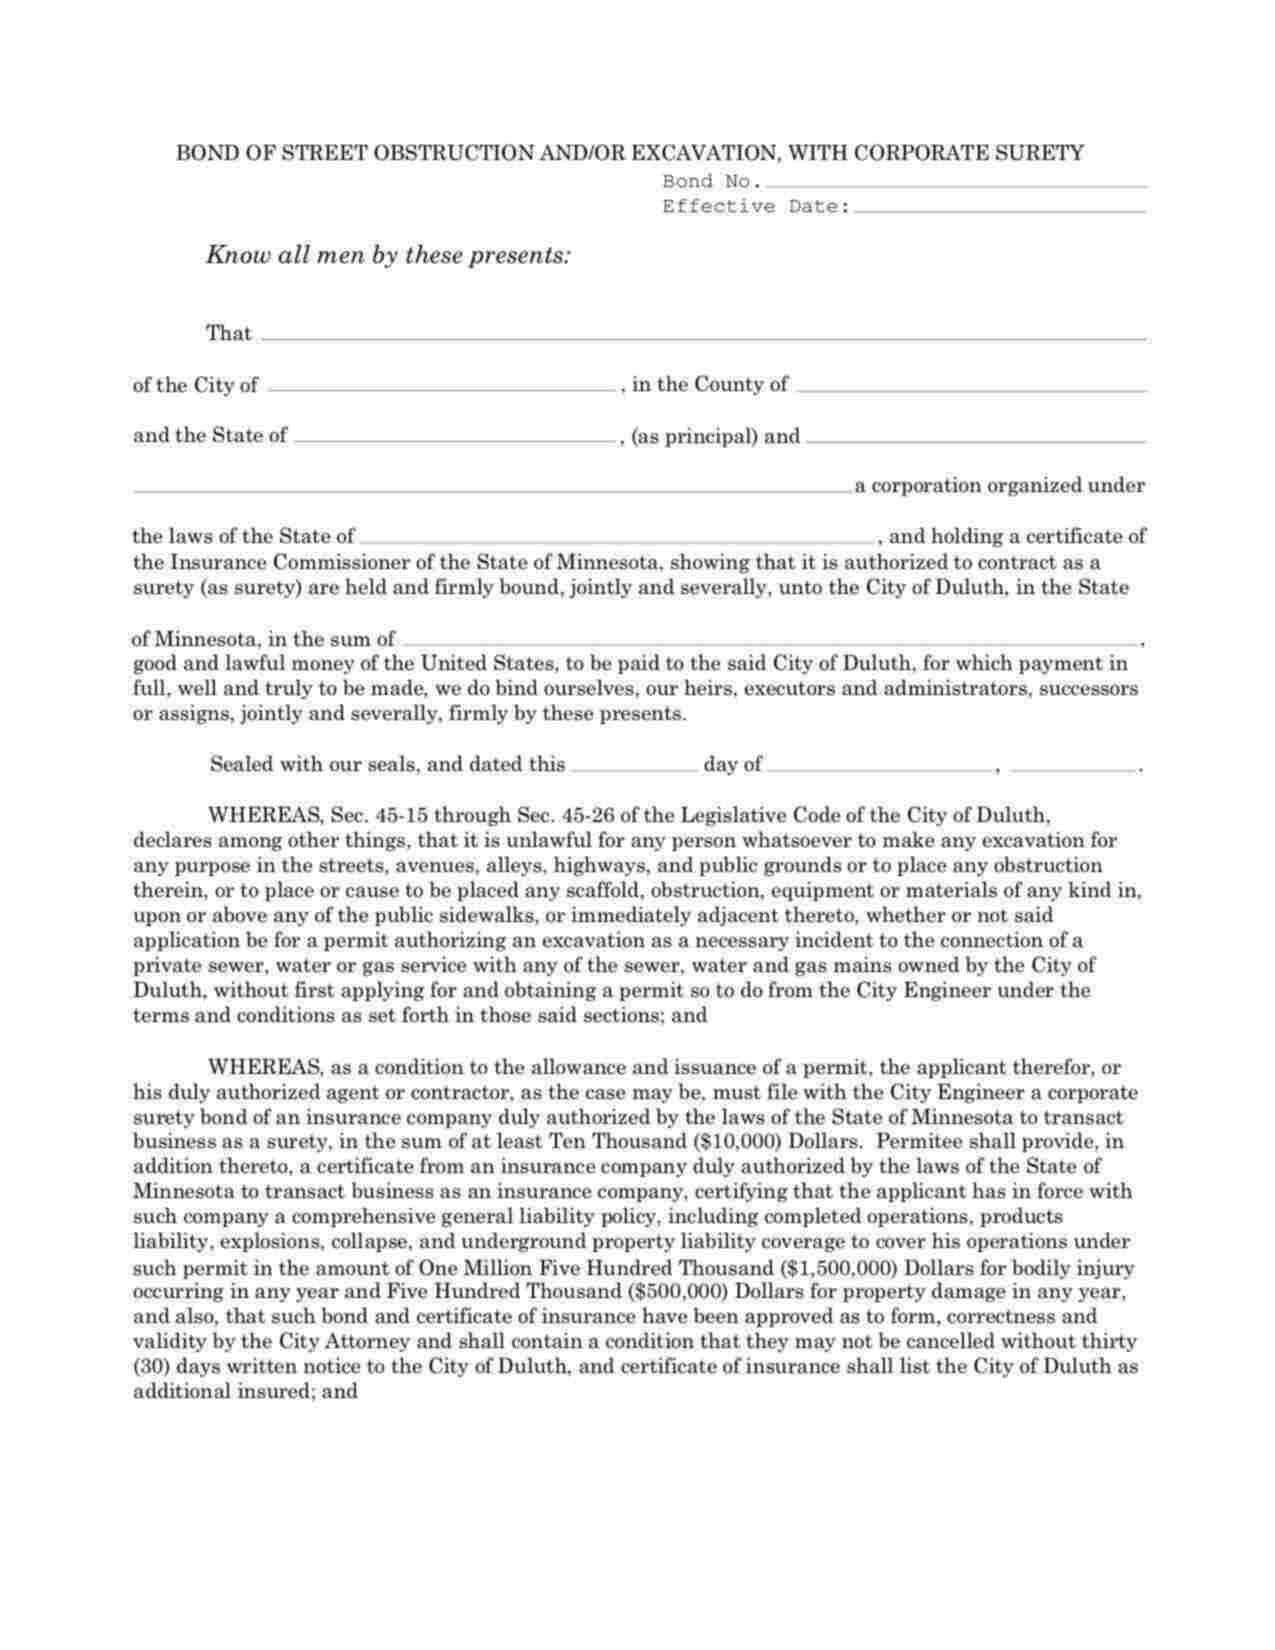 Minnesota Street Obstruction and/or Excavation Bond Form